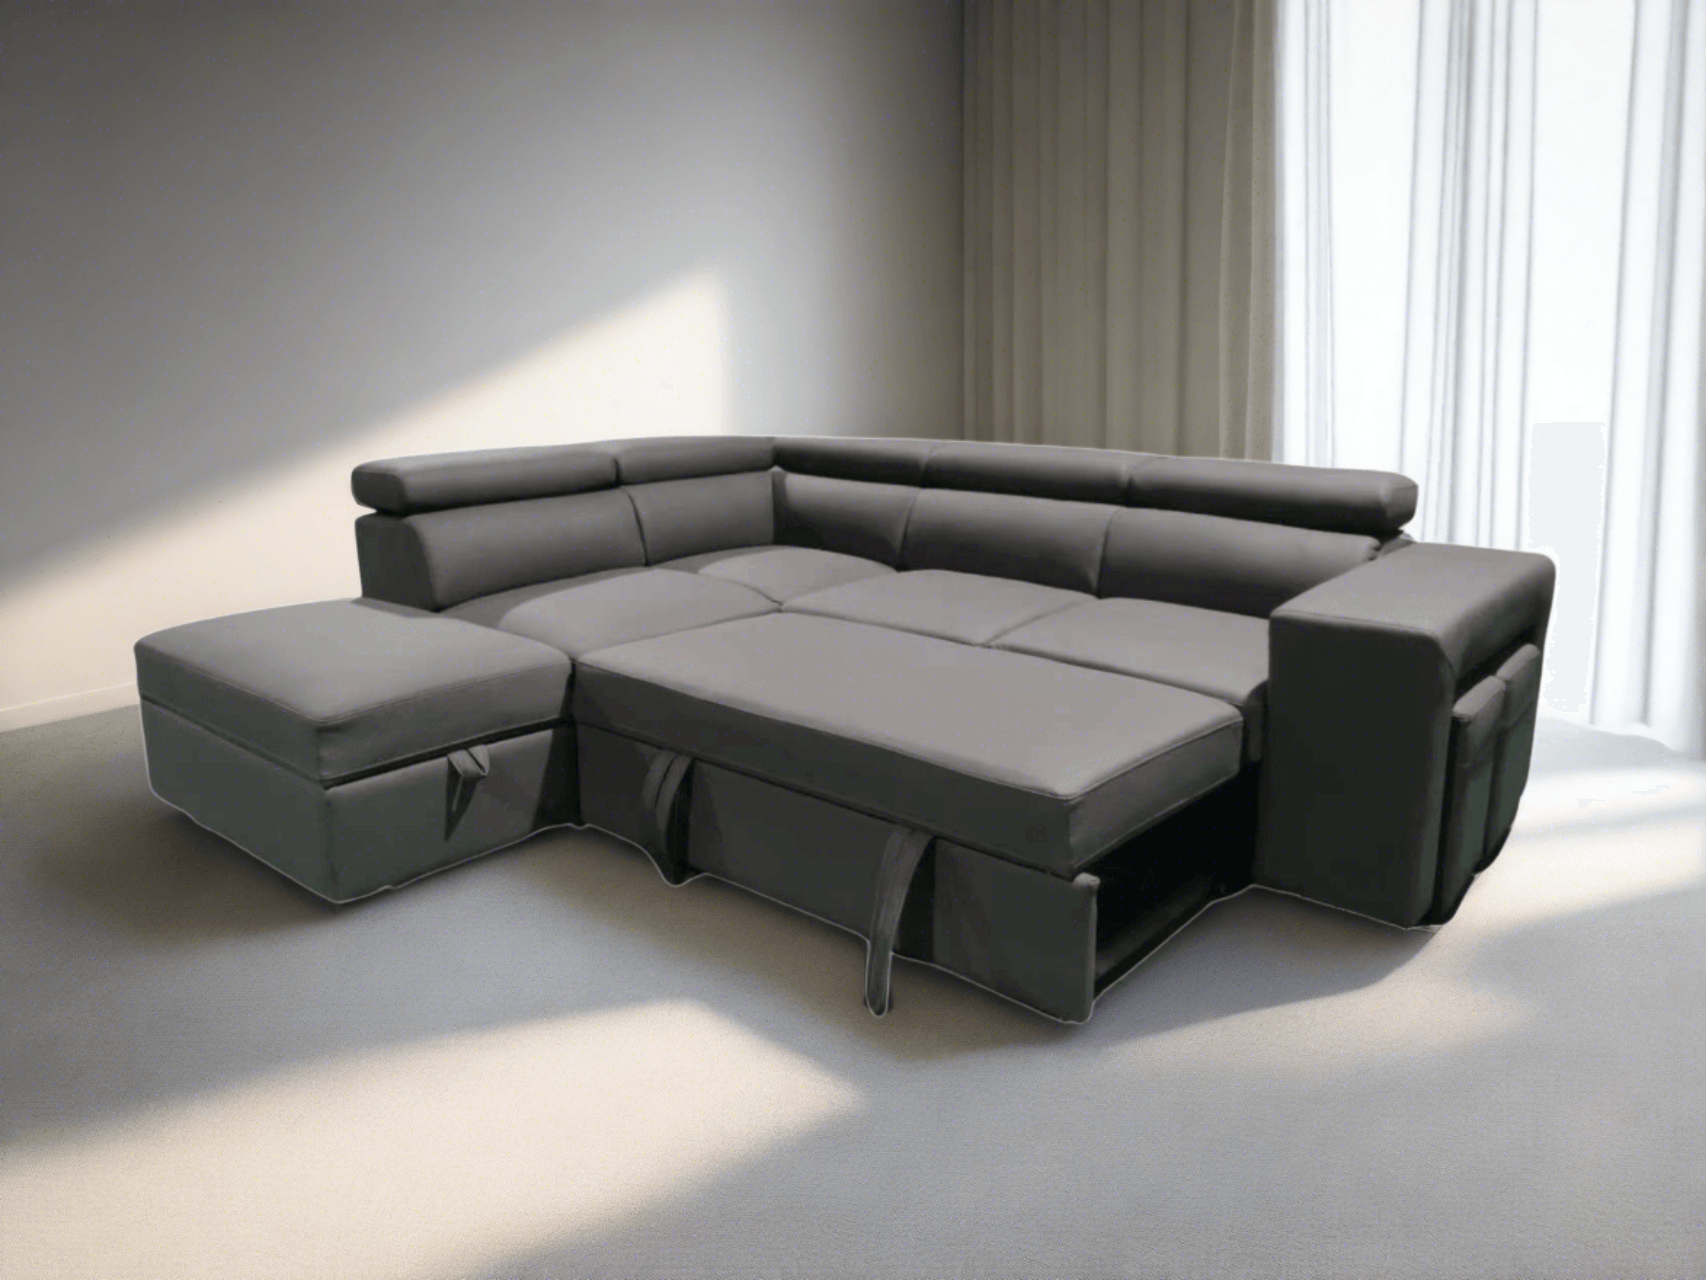 Modern living room with a stylish gray L-shaped sofa bed pulled out into a comfortable bed. Perfect for saving space and accommodating guests.